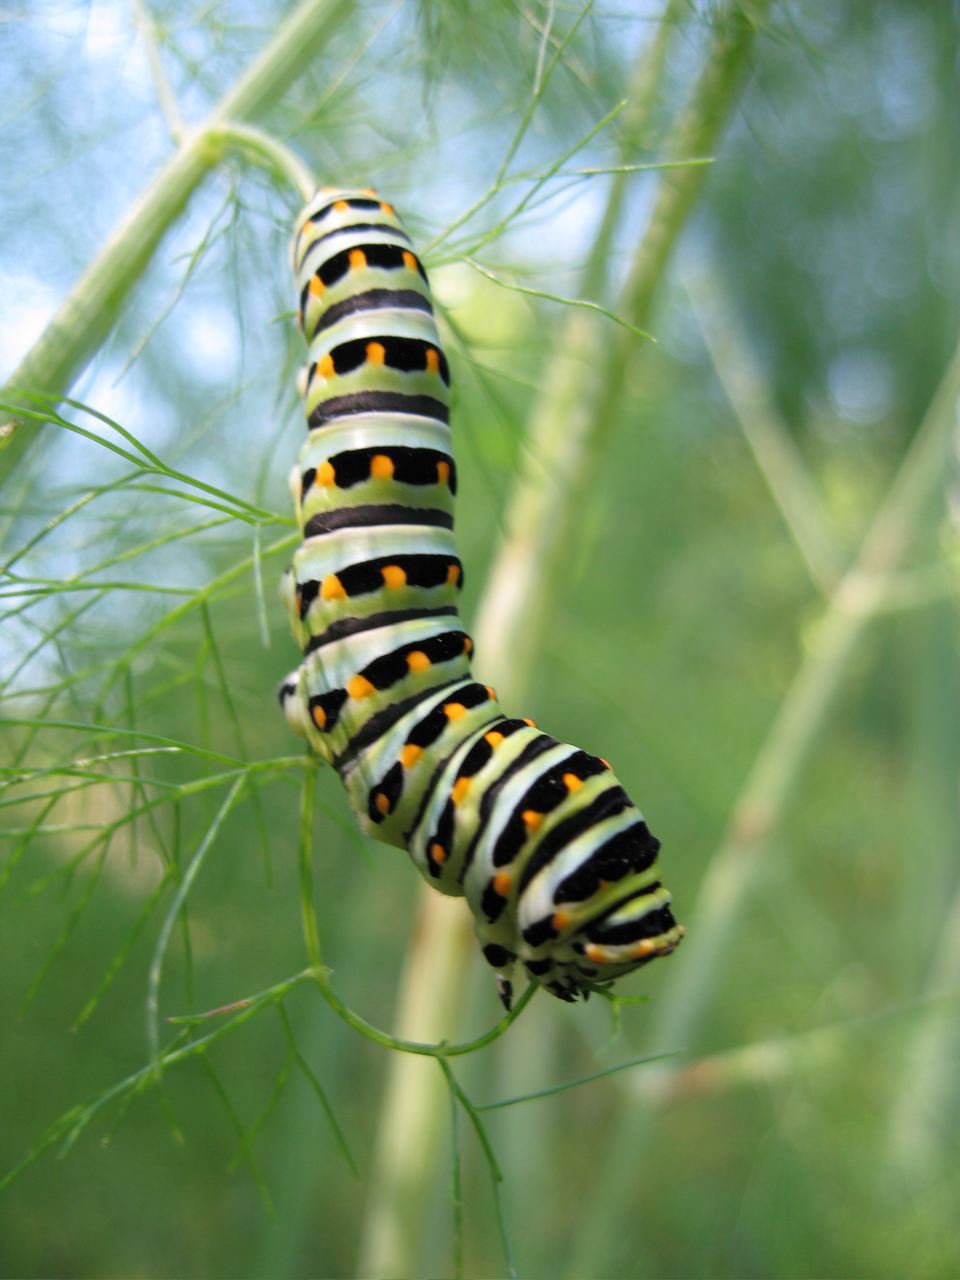 the small caterpillar has black stripes on it's shell